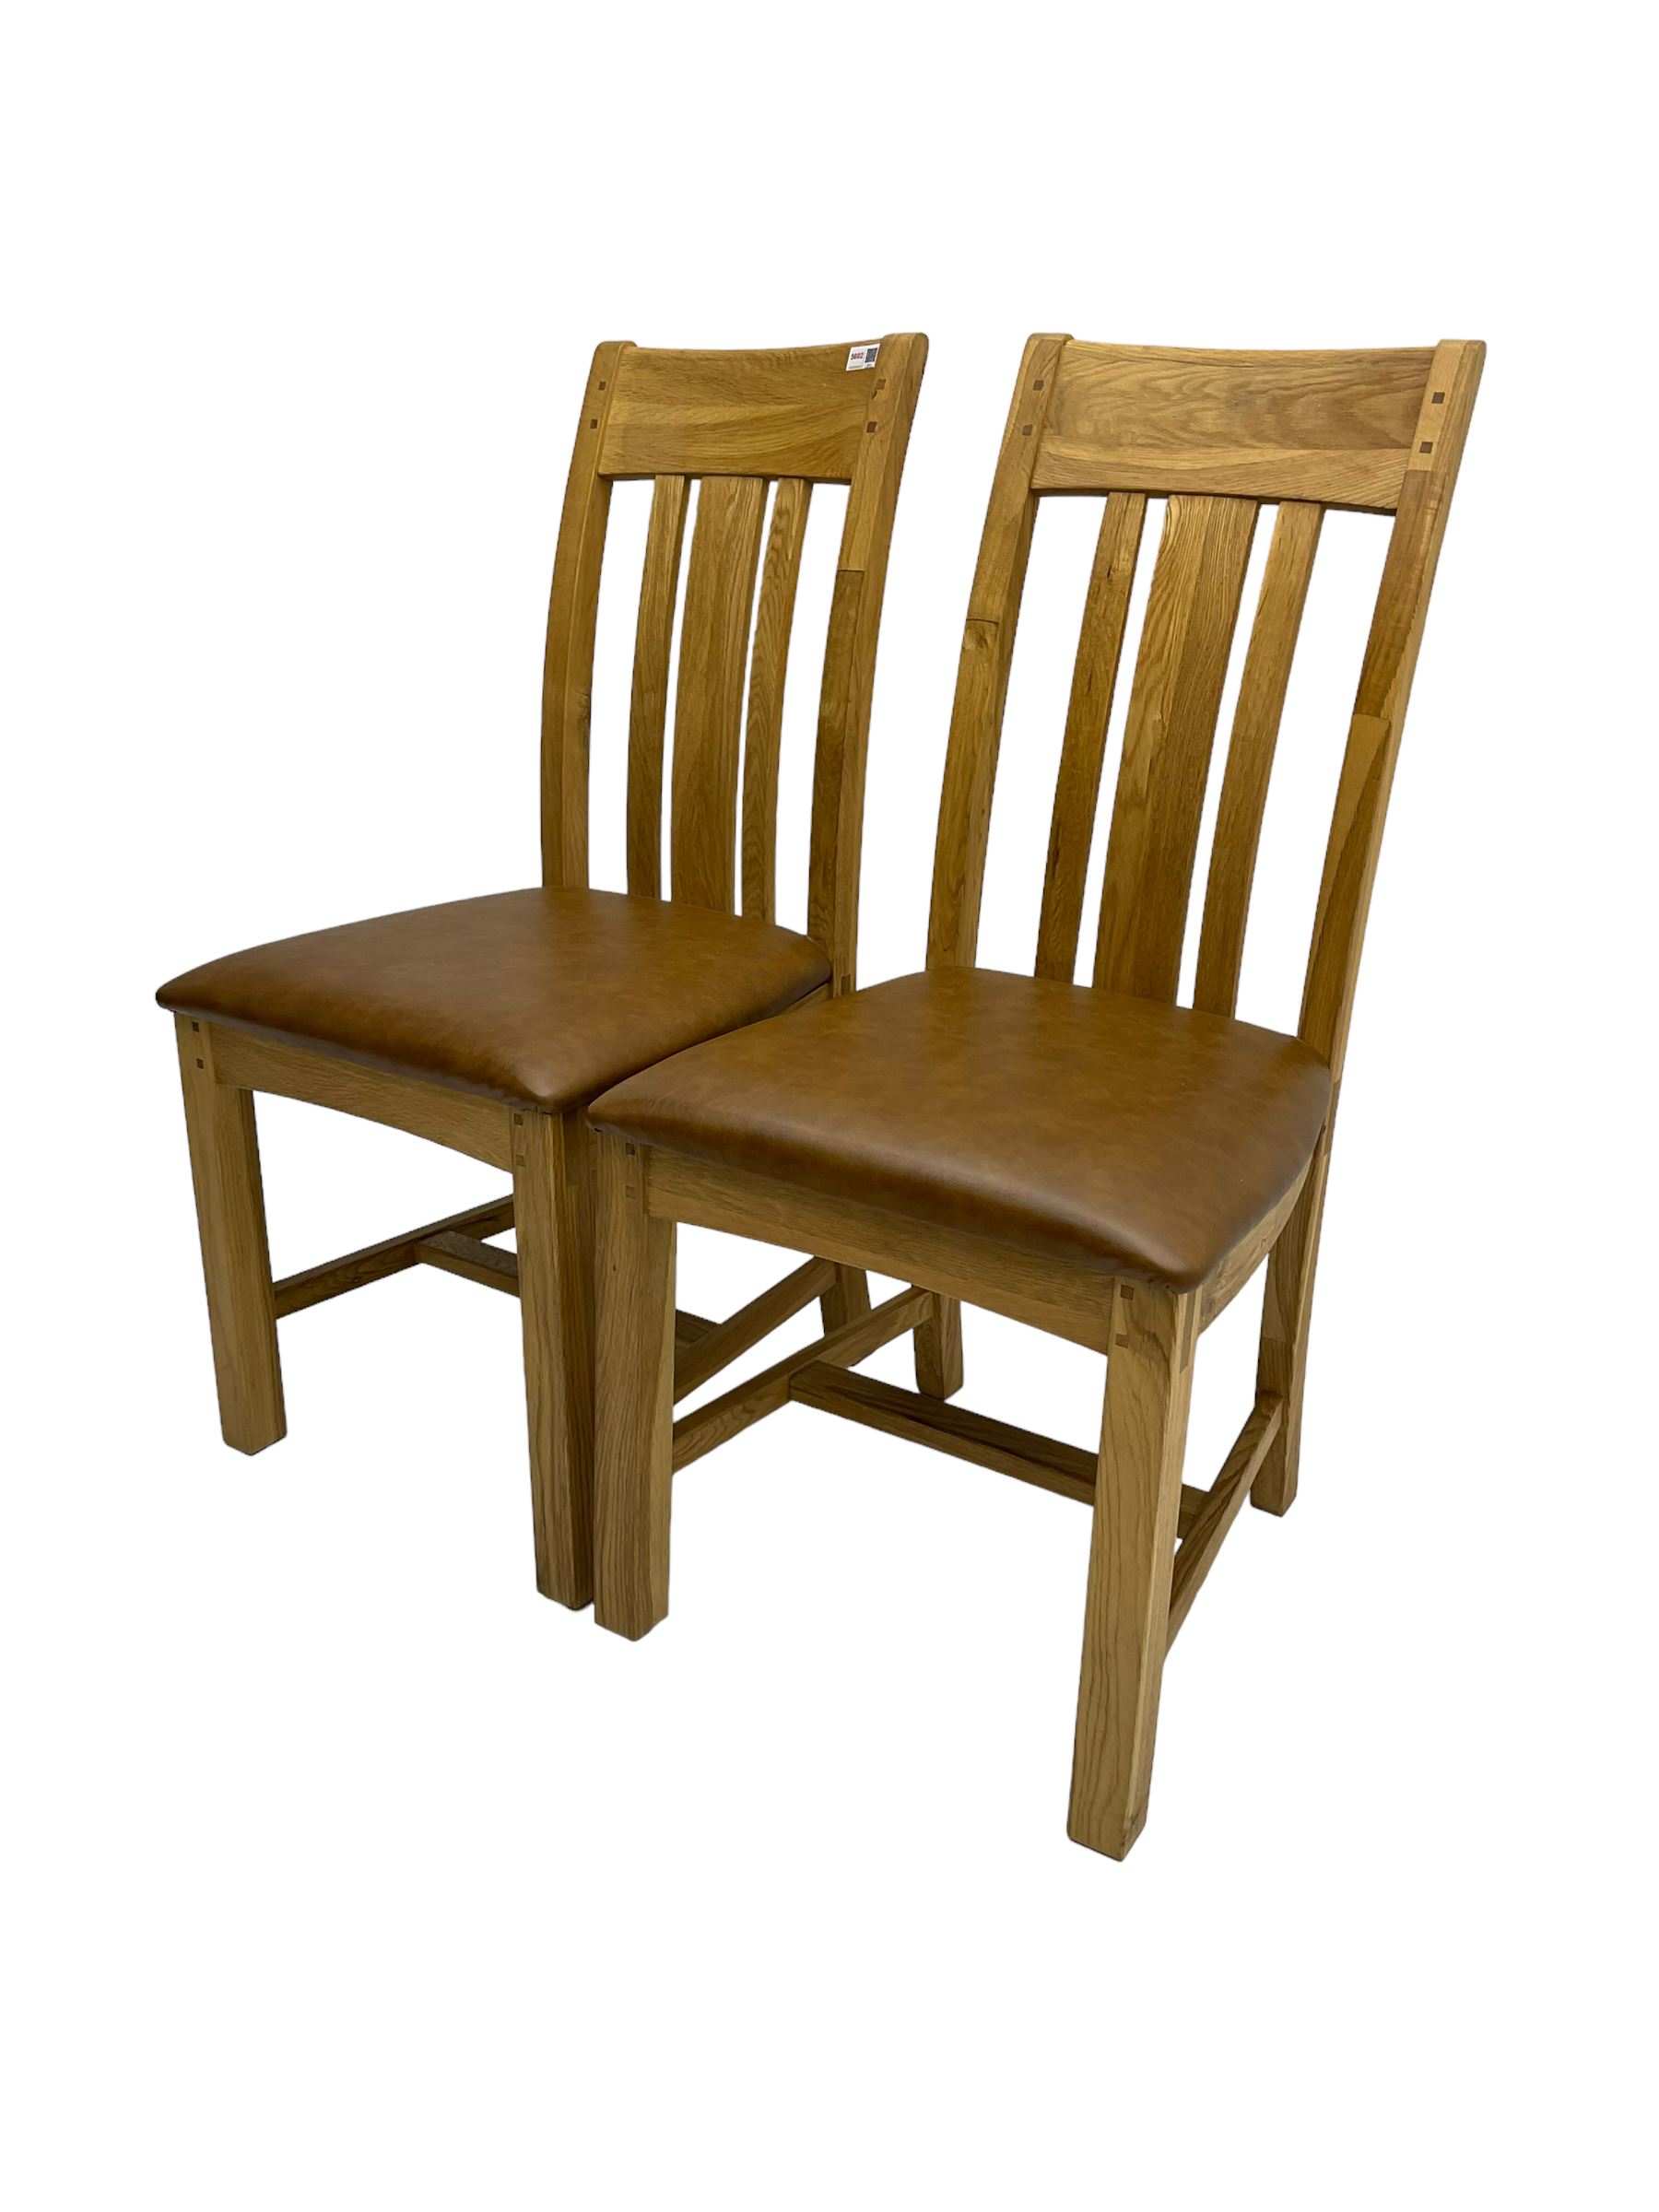 Pair of oak dining chairs - Image 2 of 2